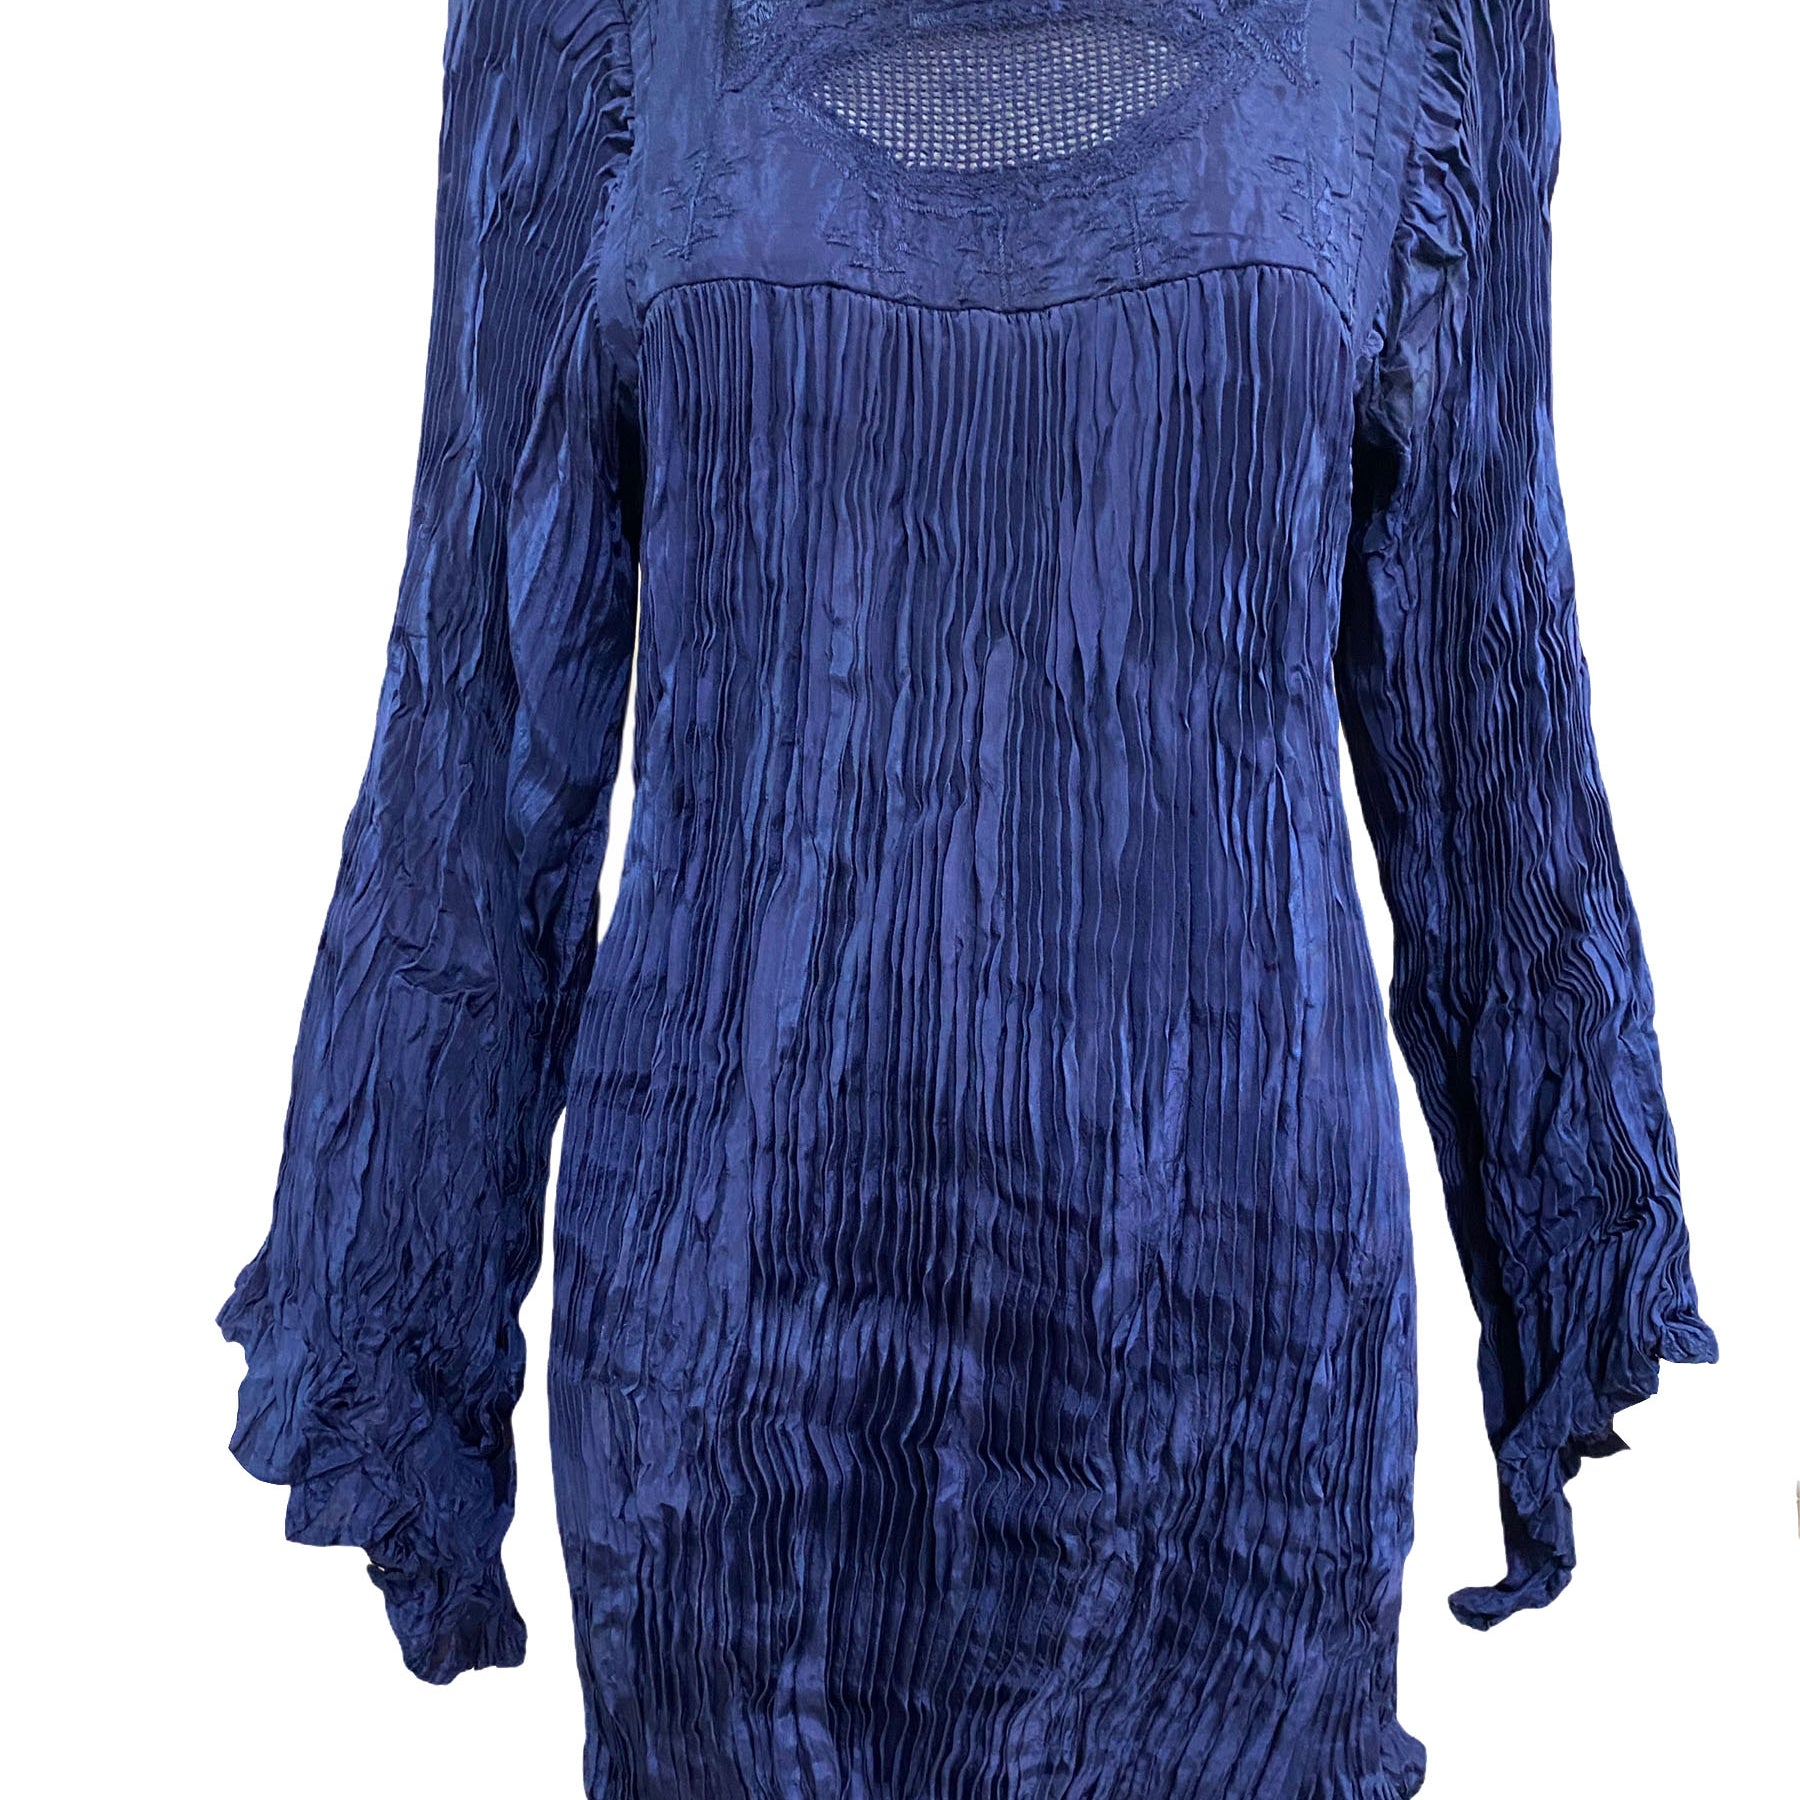 Afghani Blouse Blue Broomstick Pleated FRONT 1 of 3